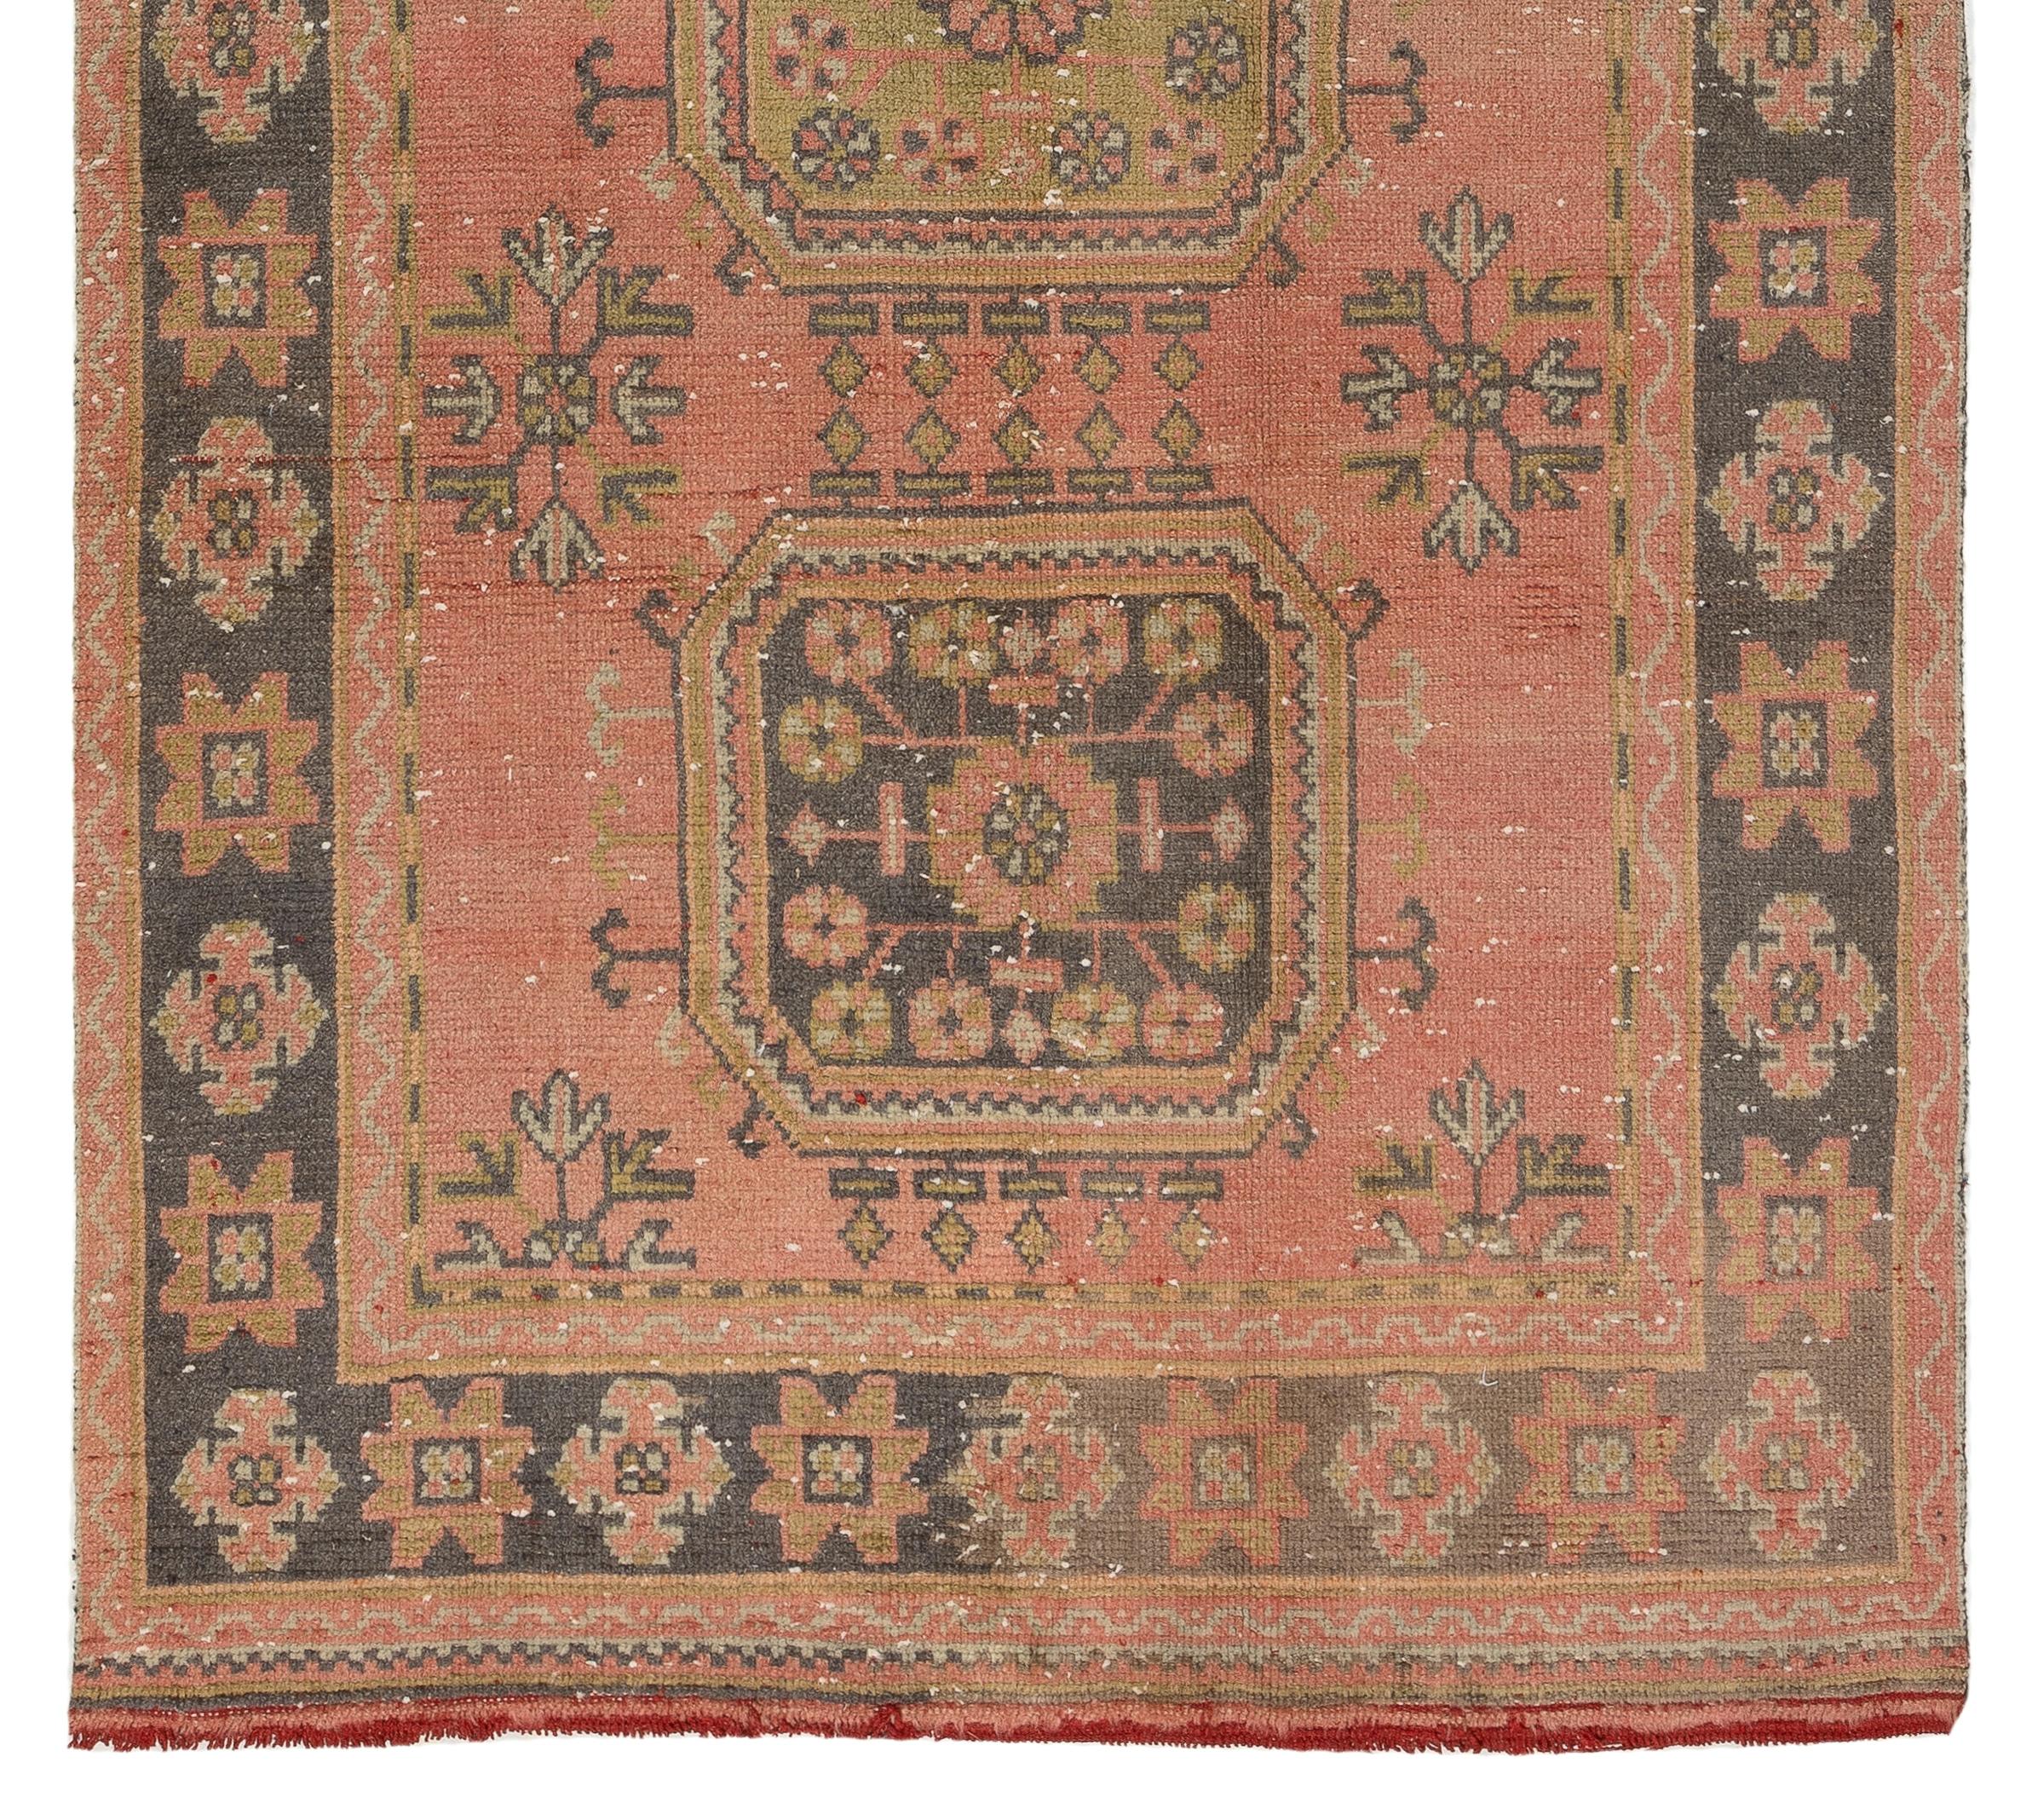 A vintage Turkish runner rug, hand-knotted with low wool pile on cotton foundation. It features linked rectilinear medallions decorated with floral head motifs against a field in dark coral pink. It is in good condition, professionally-washed,